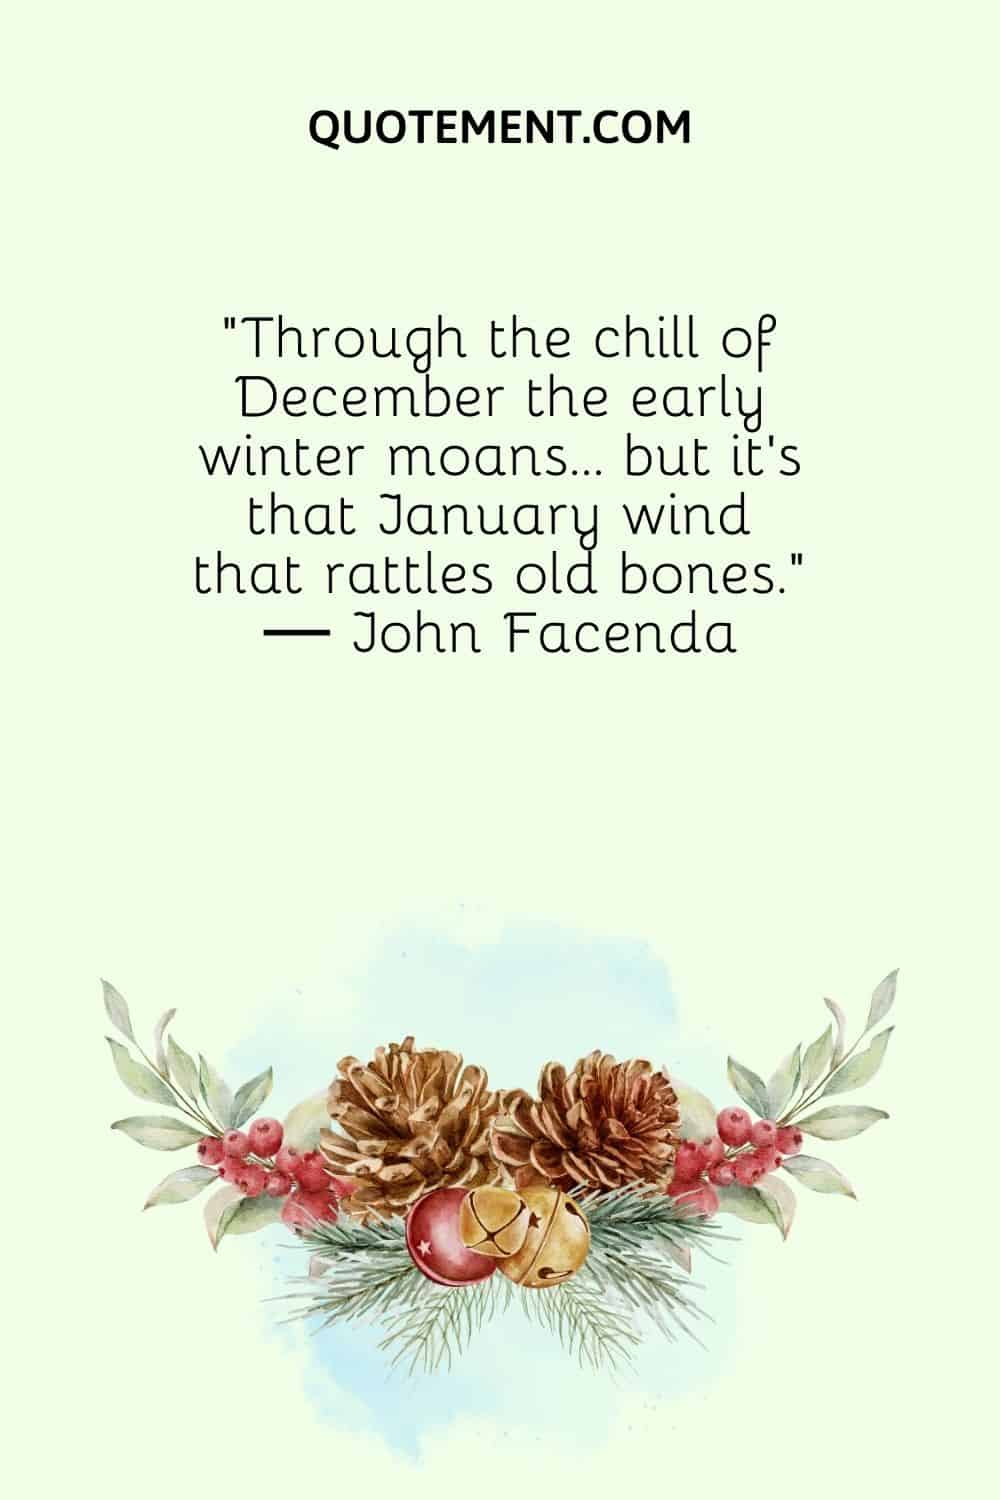 “Through the chill of December the early winter moans… but it’s that January wind that rattles old bones.” ― John Facenda